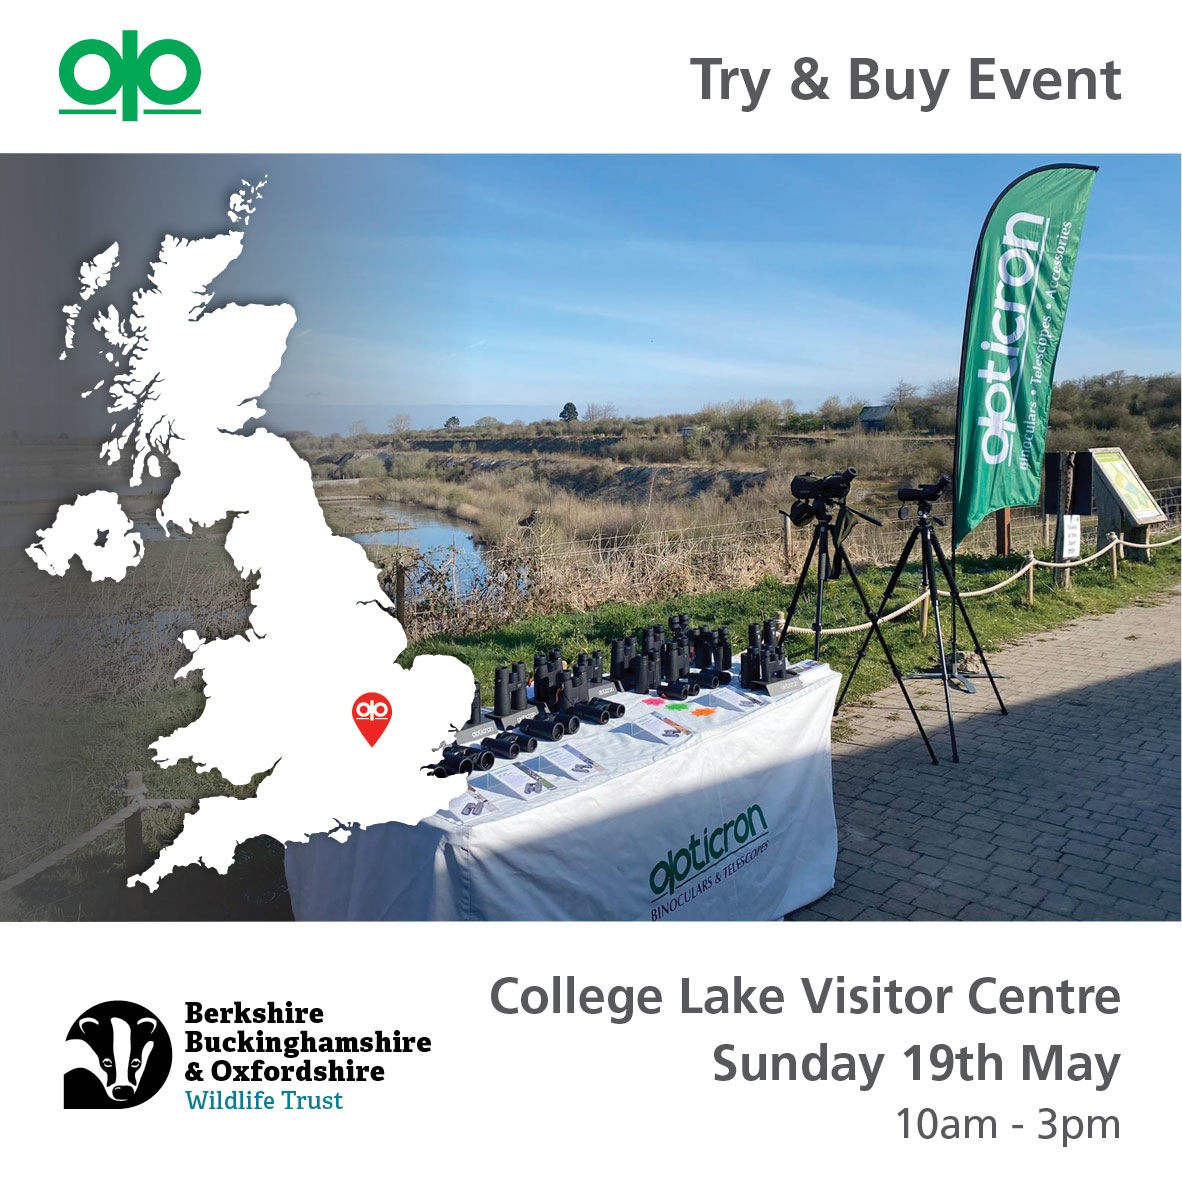 We've got some more Try & Buy events coming up over the next two weeks: 11/05 Wild Chesil Centre @DorsetWildlife 17/05 Gibraltar Point Visitor Centre @LincsWildlife 18/05 Potteric carr Nature Reserve @YorksWildlife 19/05 College Lake Visitor Centre @BBOWT